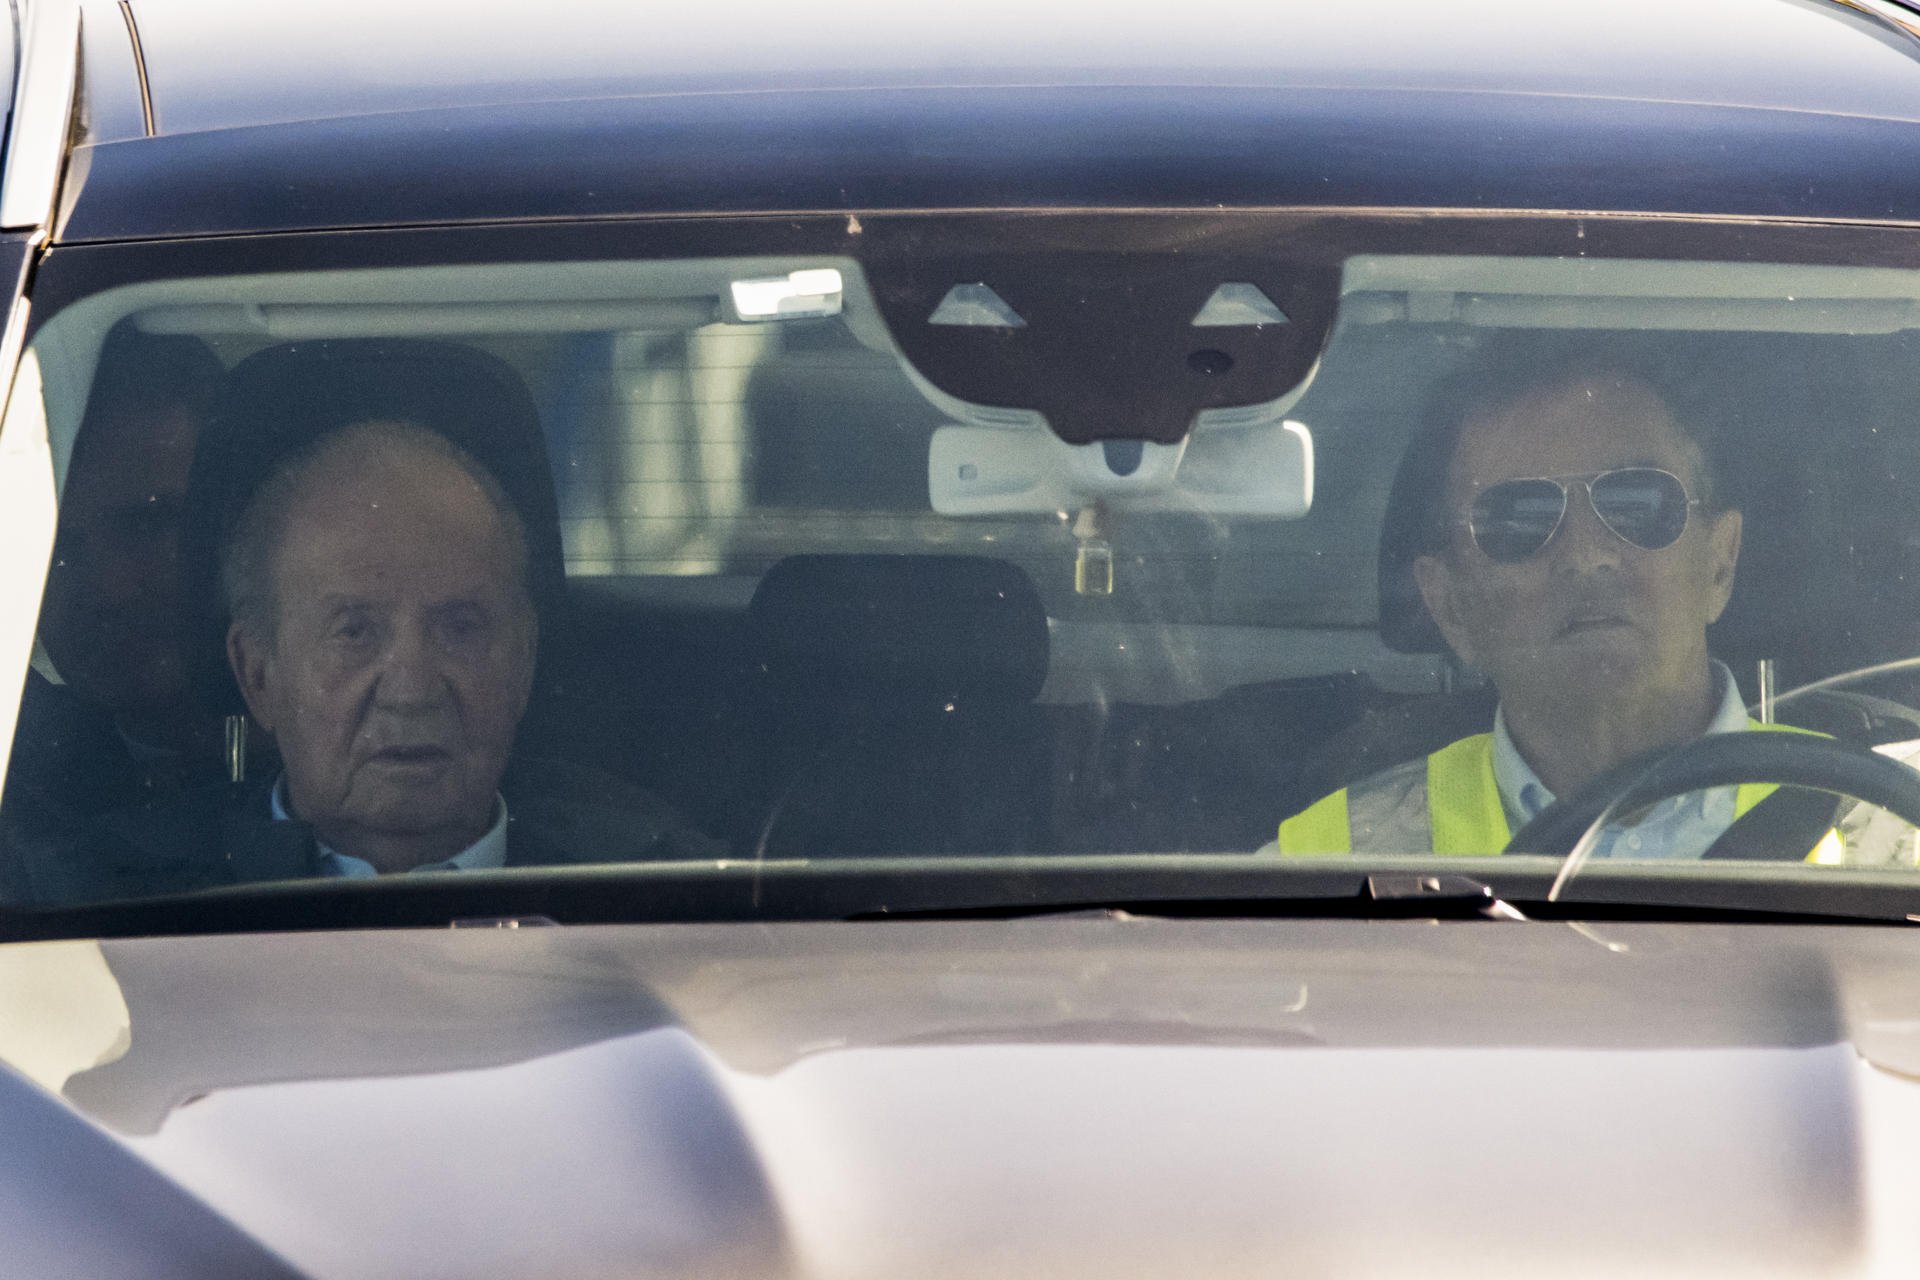 The king who fled, Juan Carlos I, returns to Spain a second time for more boat races